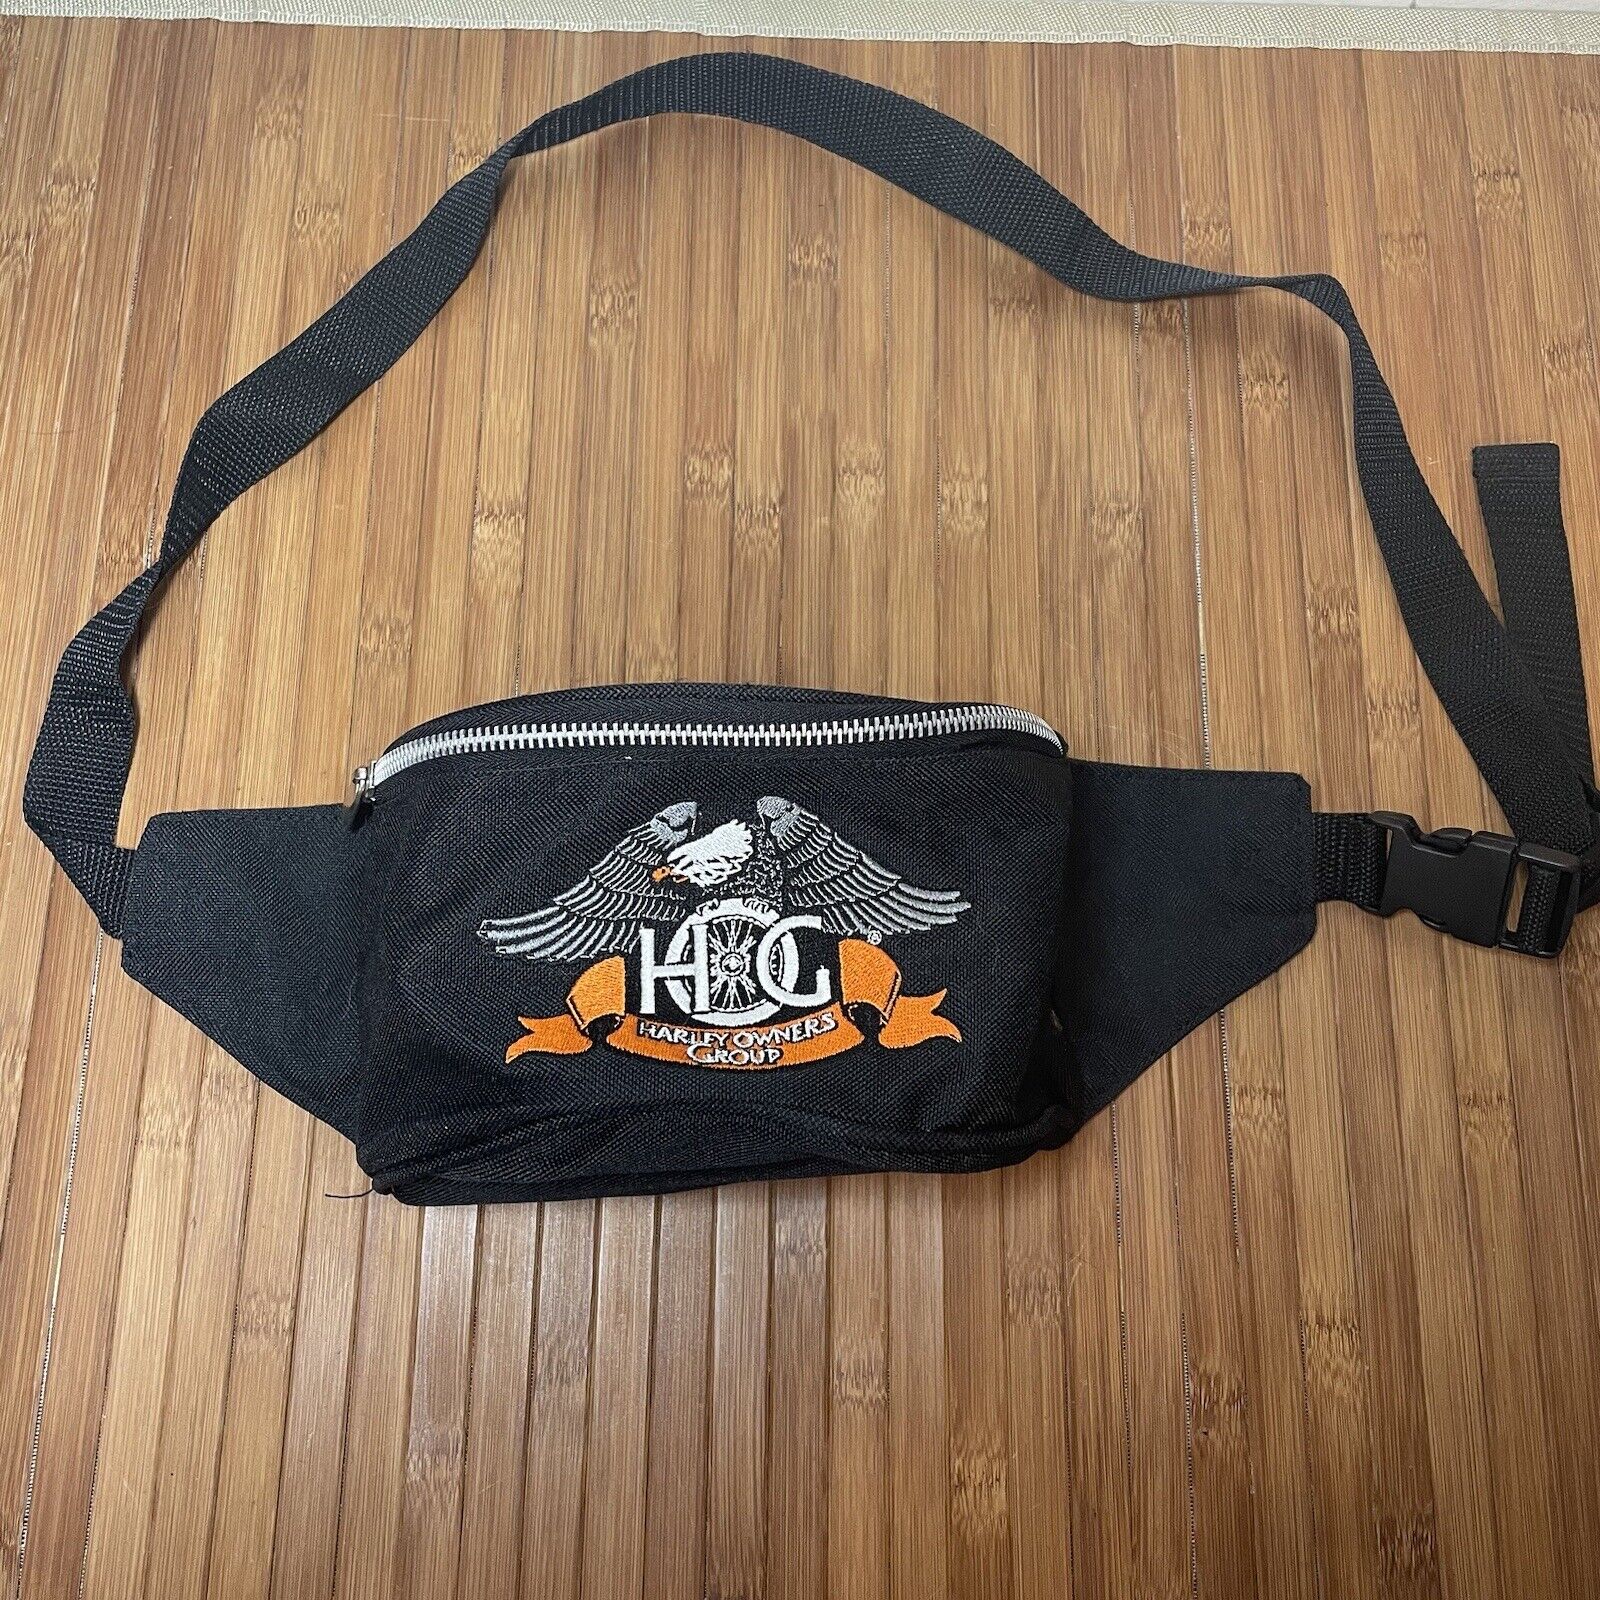 Vintage Harley Owner’s Group Black Fanny Pack HOG Carry Purse Travel Waist Pouch